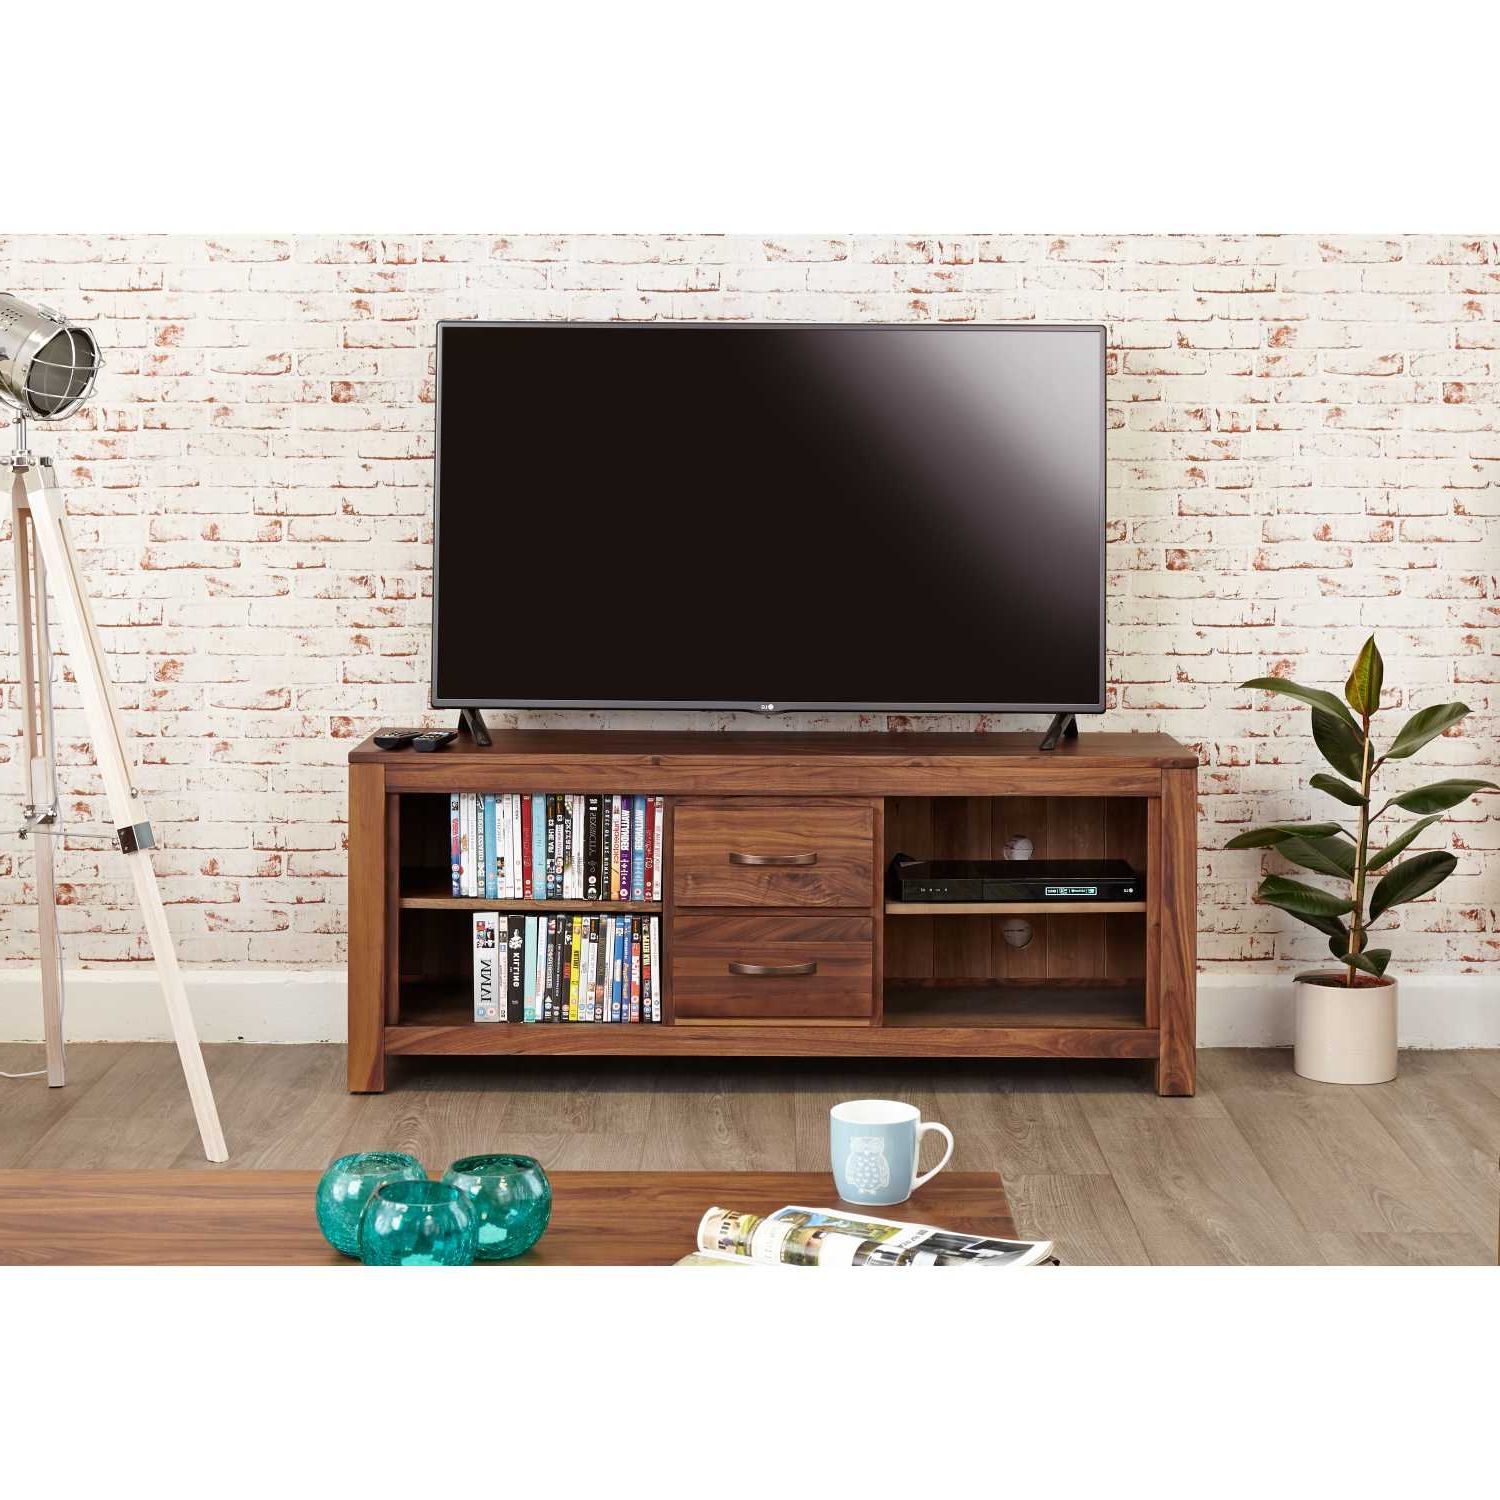 Solid Walnut Widescreen Television Cabinet Tv Media Unit With Regard To Tv Stands With 2 Open Shelves 2 Drawers High Gloss Tv Unis (View 7 of 20)